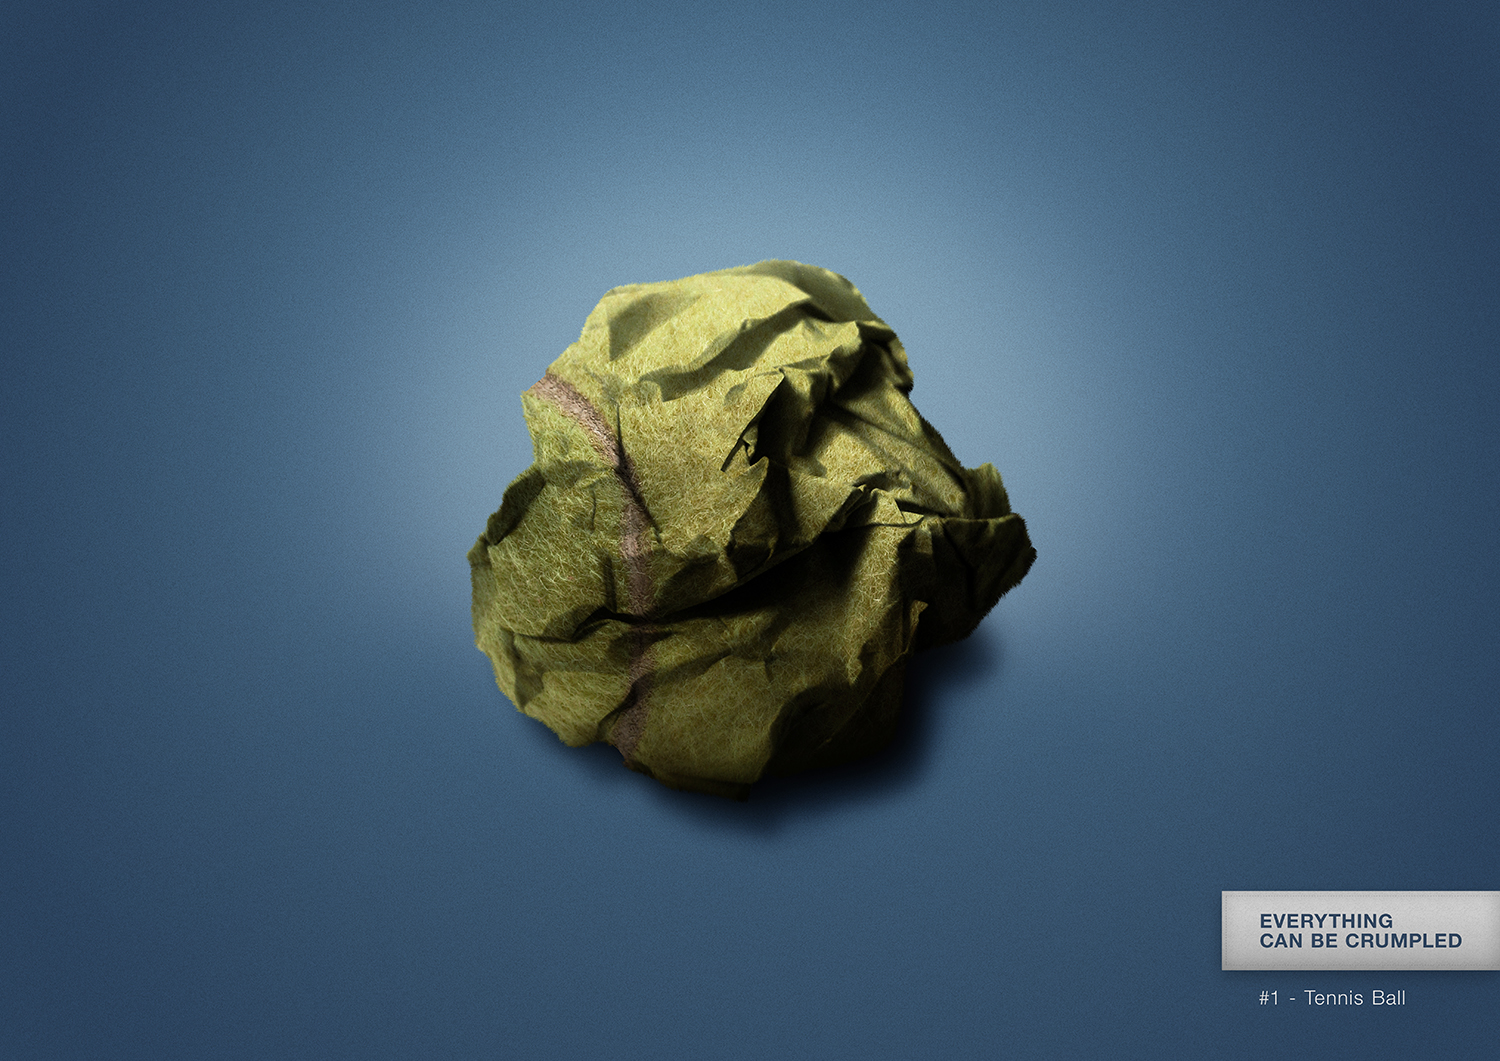 Everything can be crumpled - #1 Tennis Ball